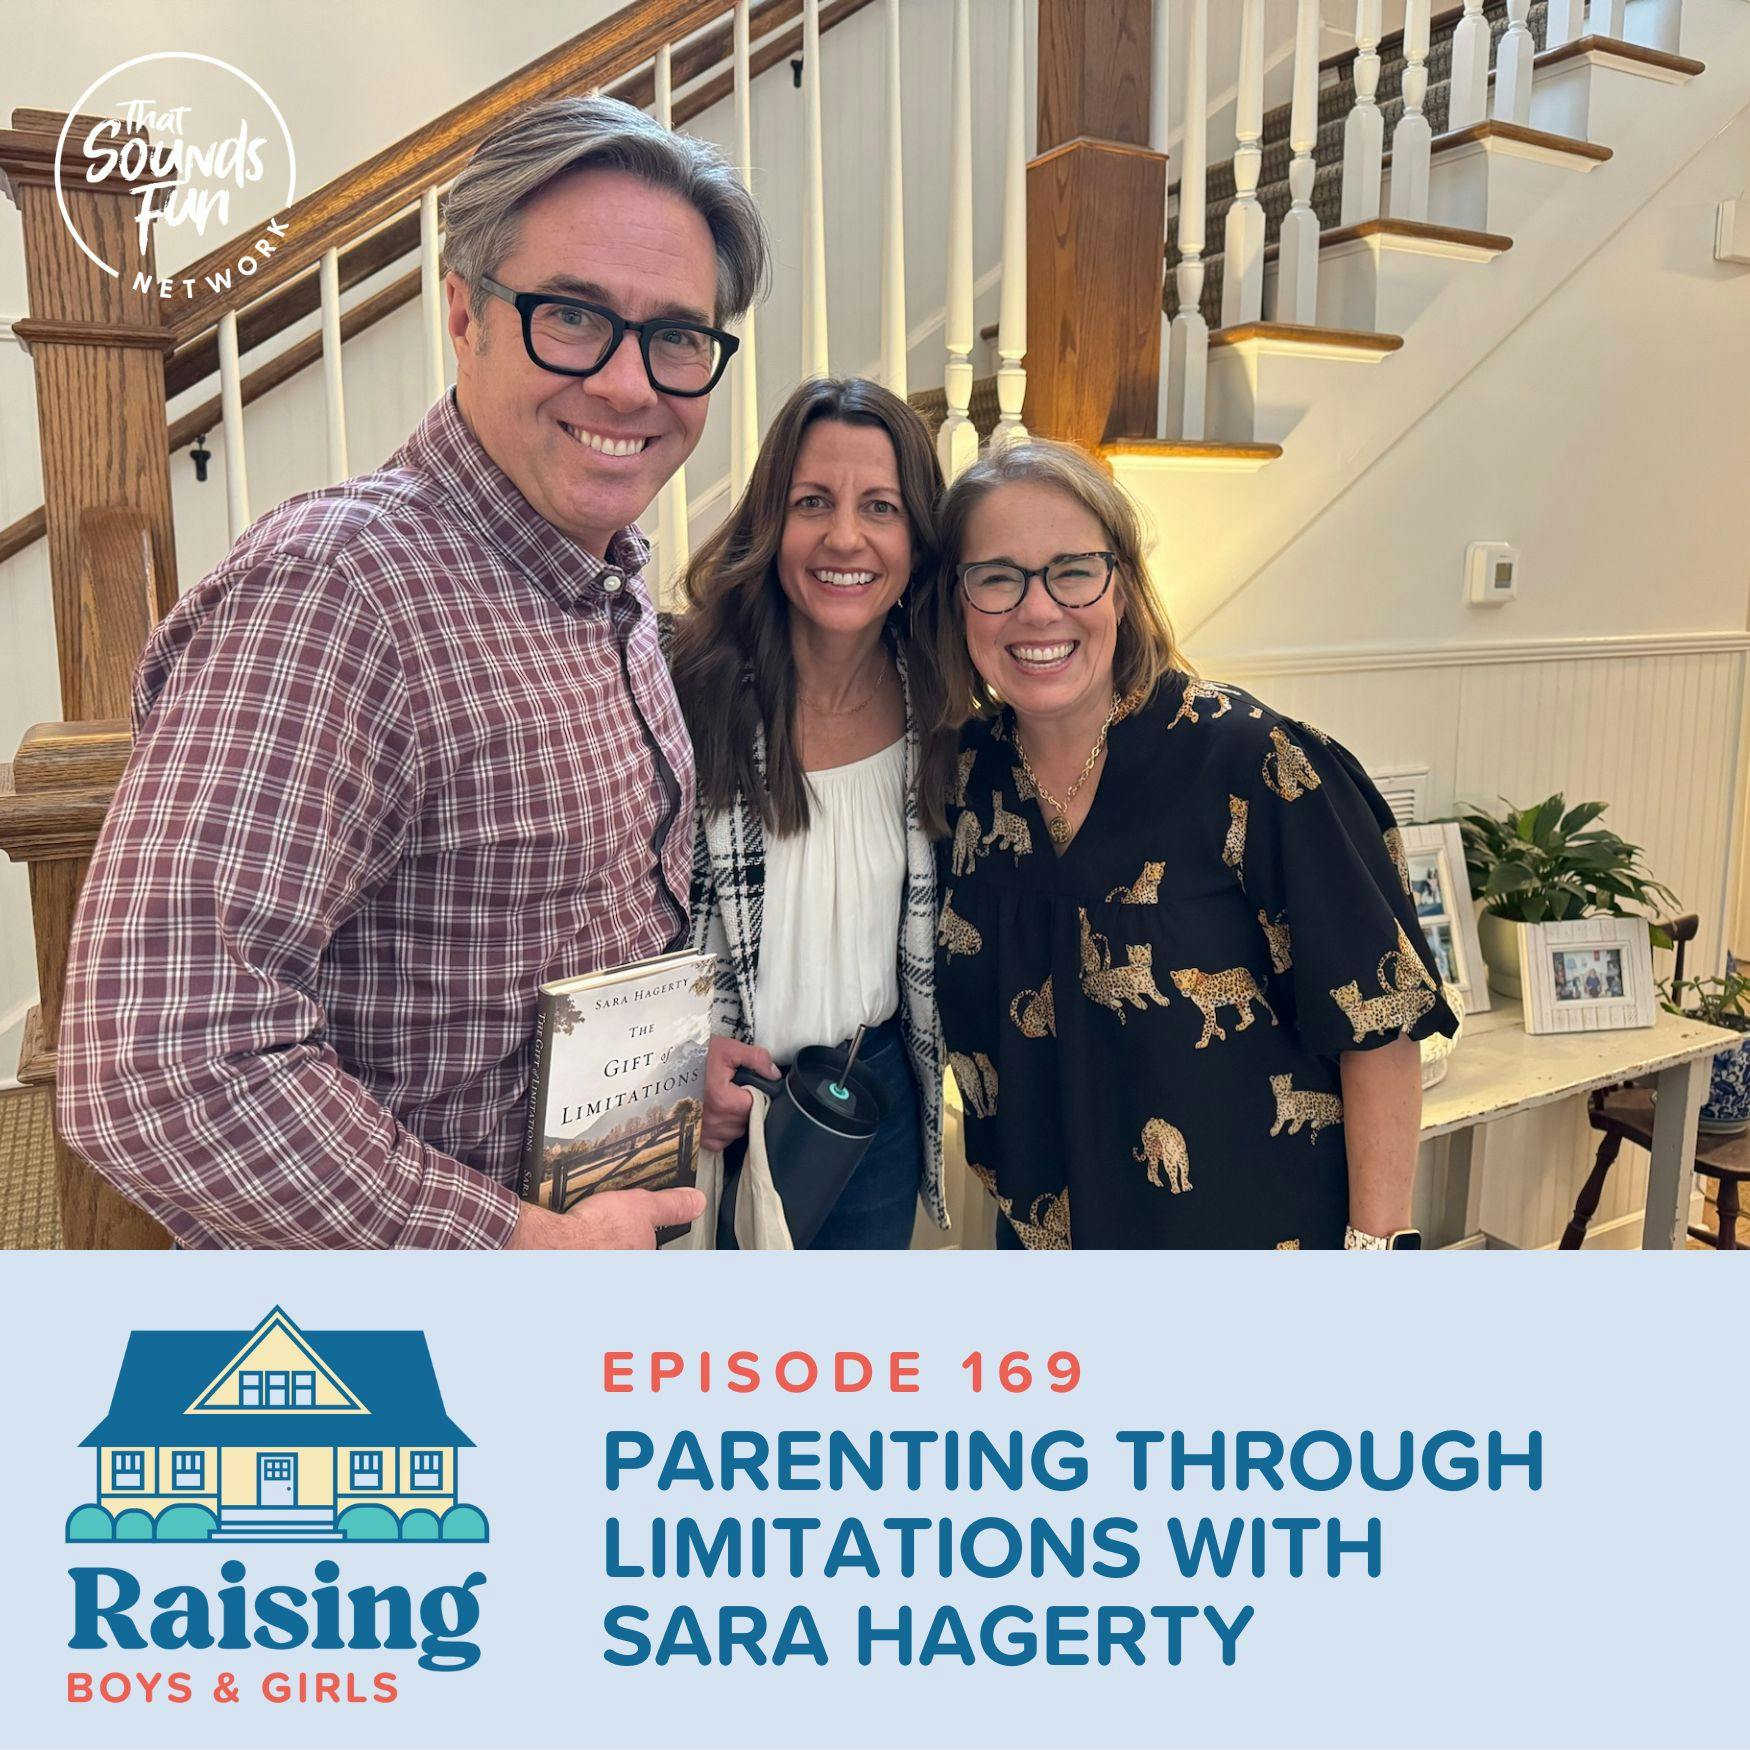 Episode 169: Parenting Through Limitations with Sara Hagerty